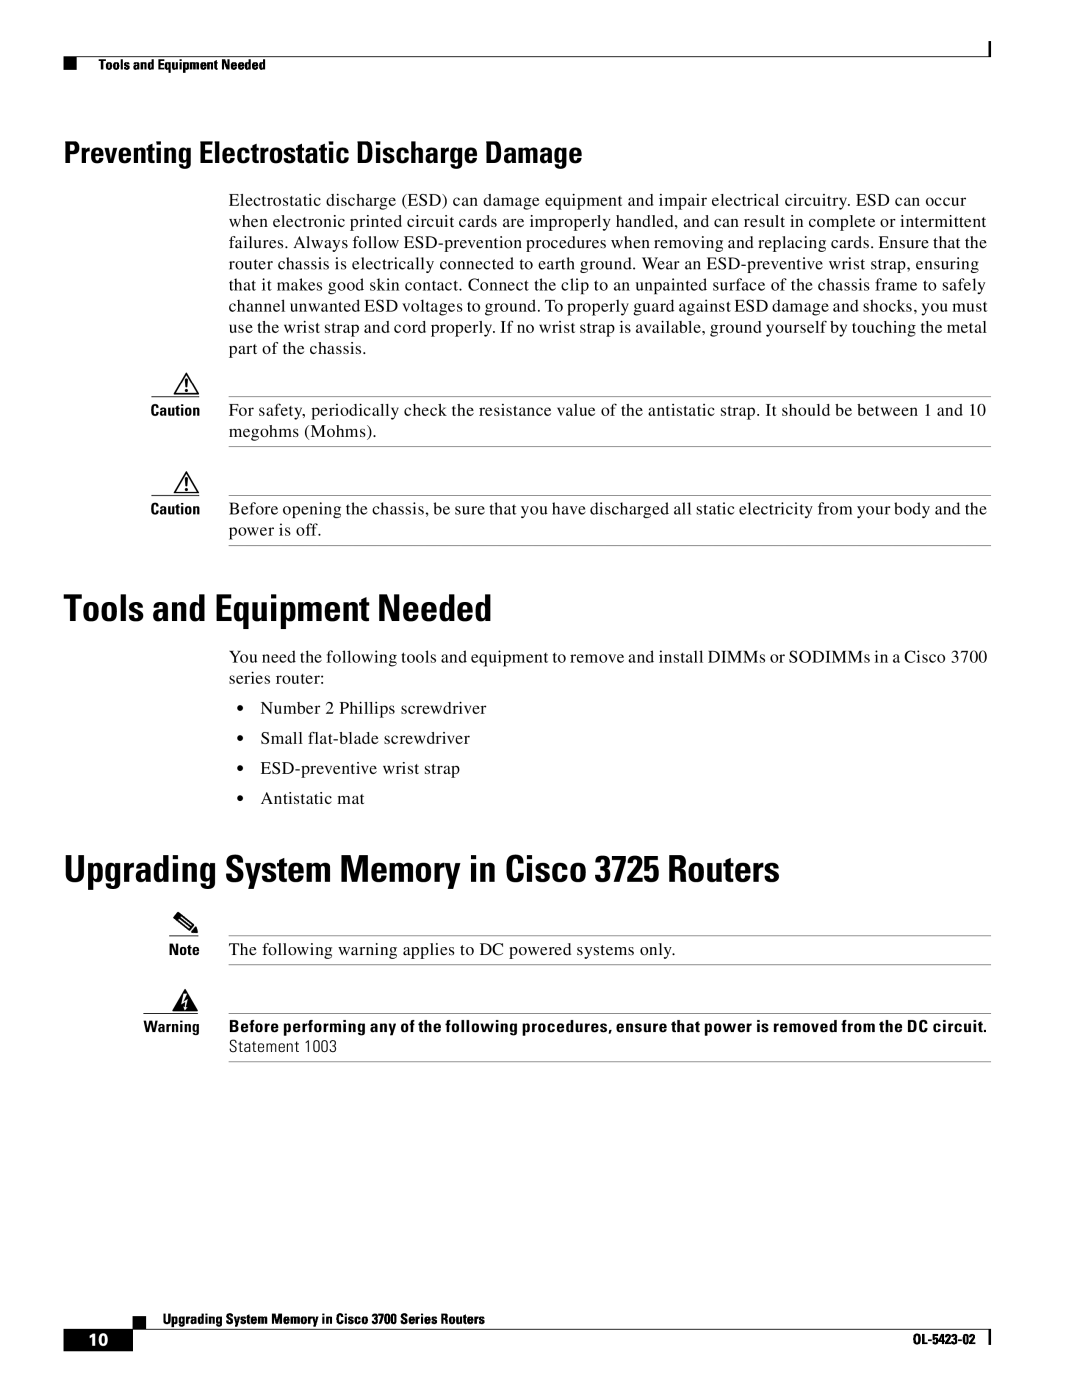 Cisco Systems 3725 Series, 3600 Series manual Tools and Equipment Needed, Upgrading System Memory in Cisco 3725 Routers 